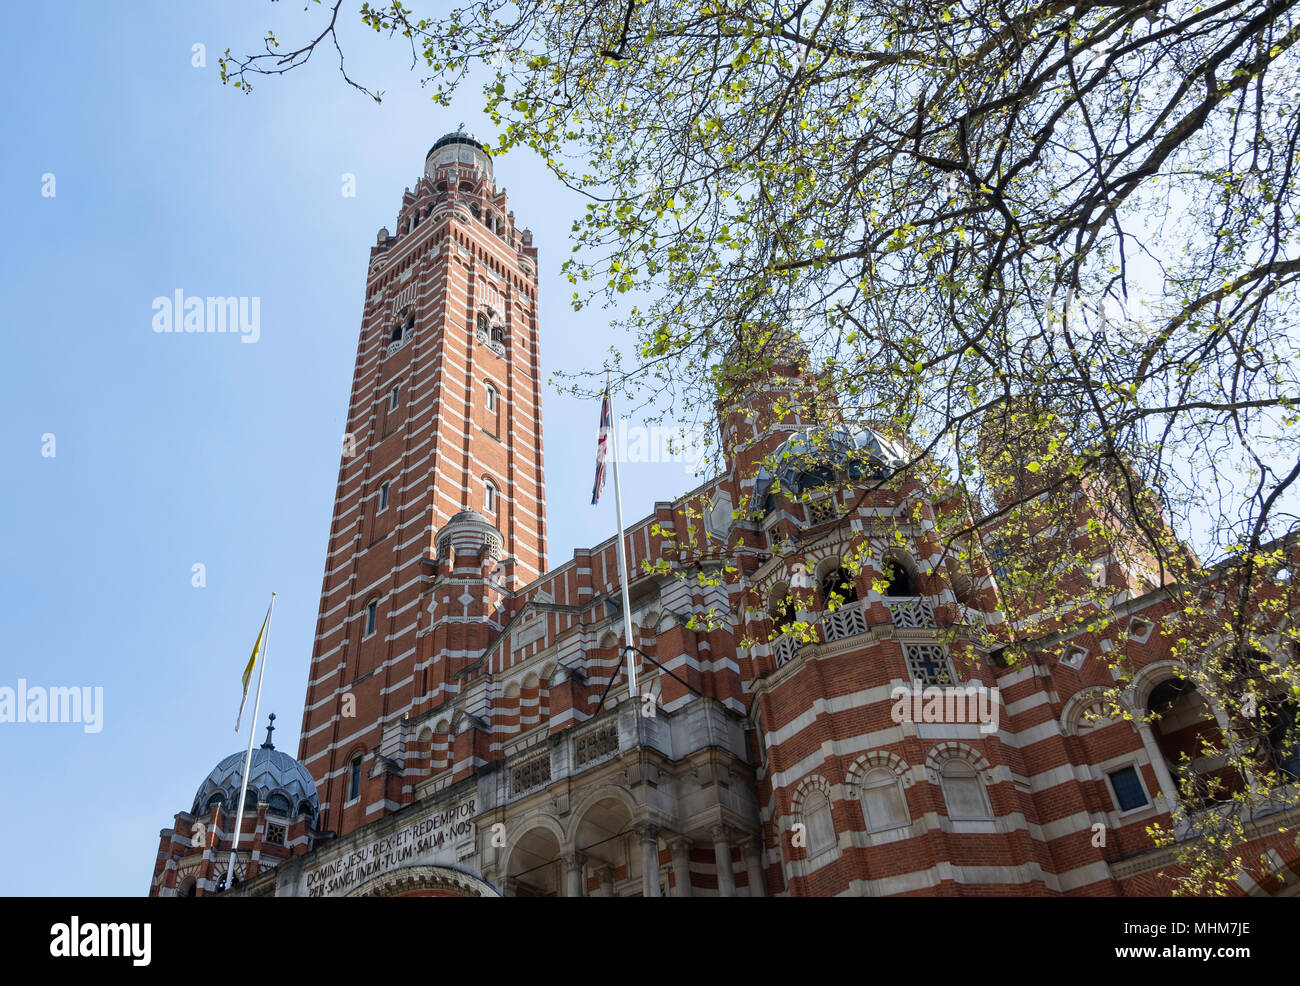 Westminster Cathedral, Victoria Street, Victoria, City of Westminster, Greater London, England, United Kingdom Stock Photo